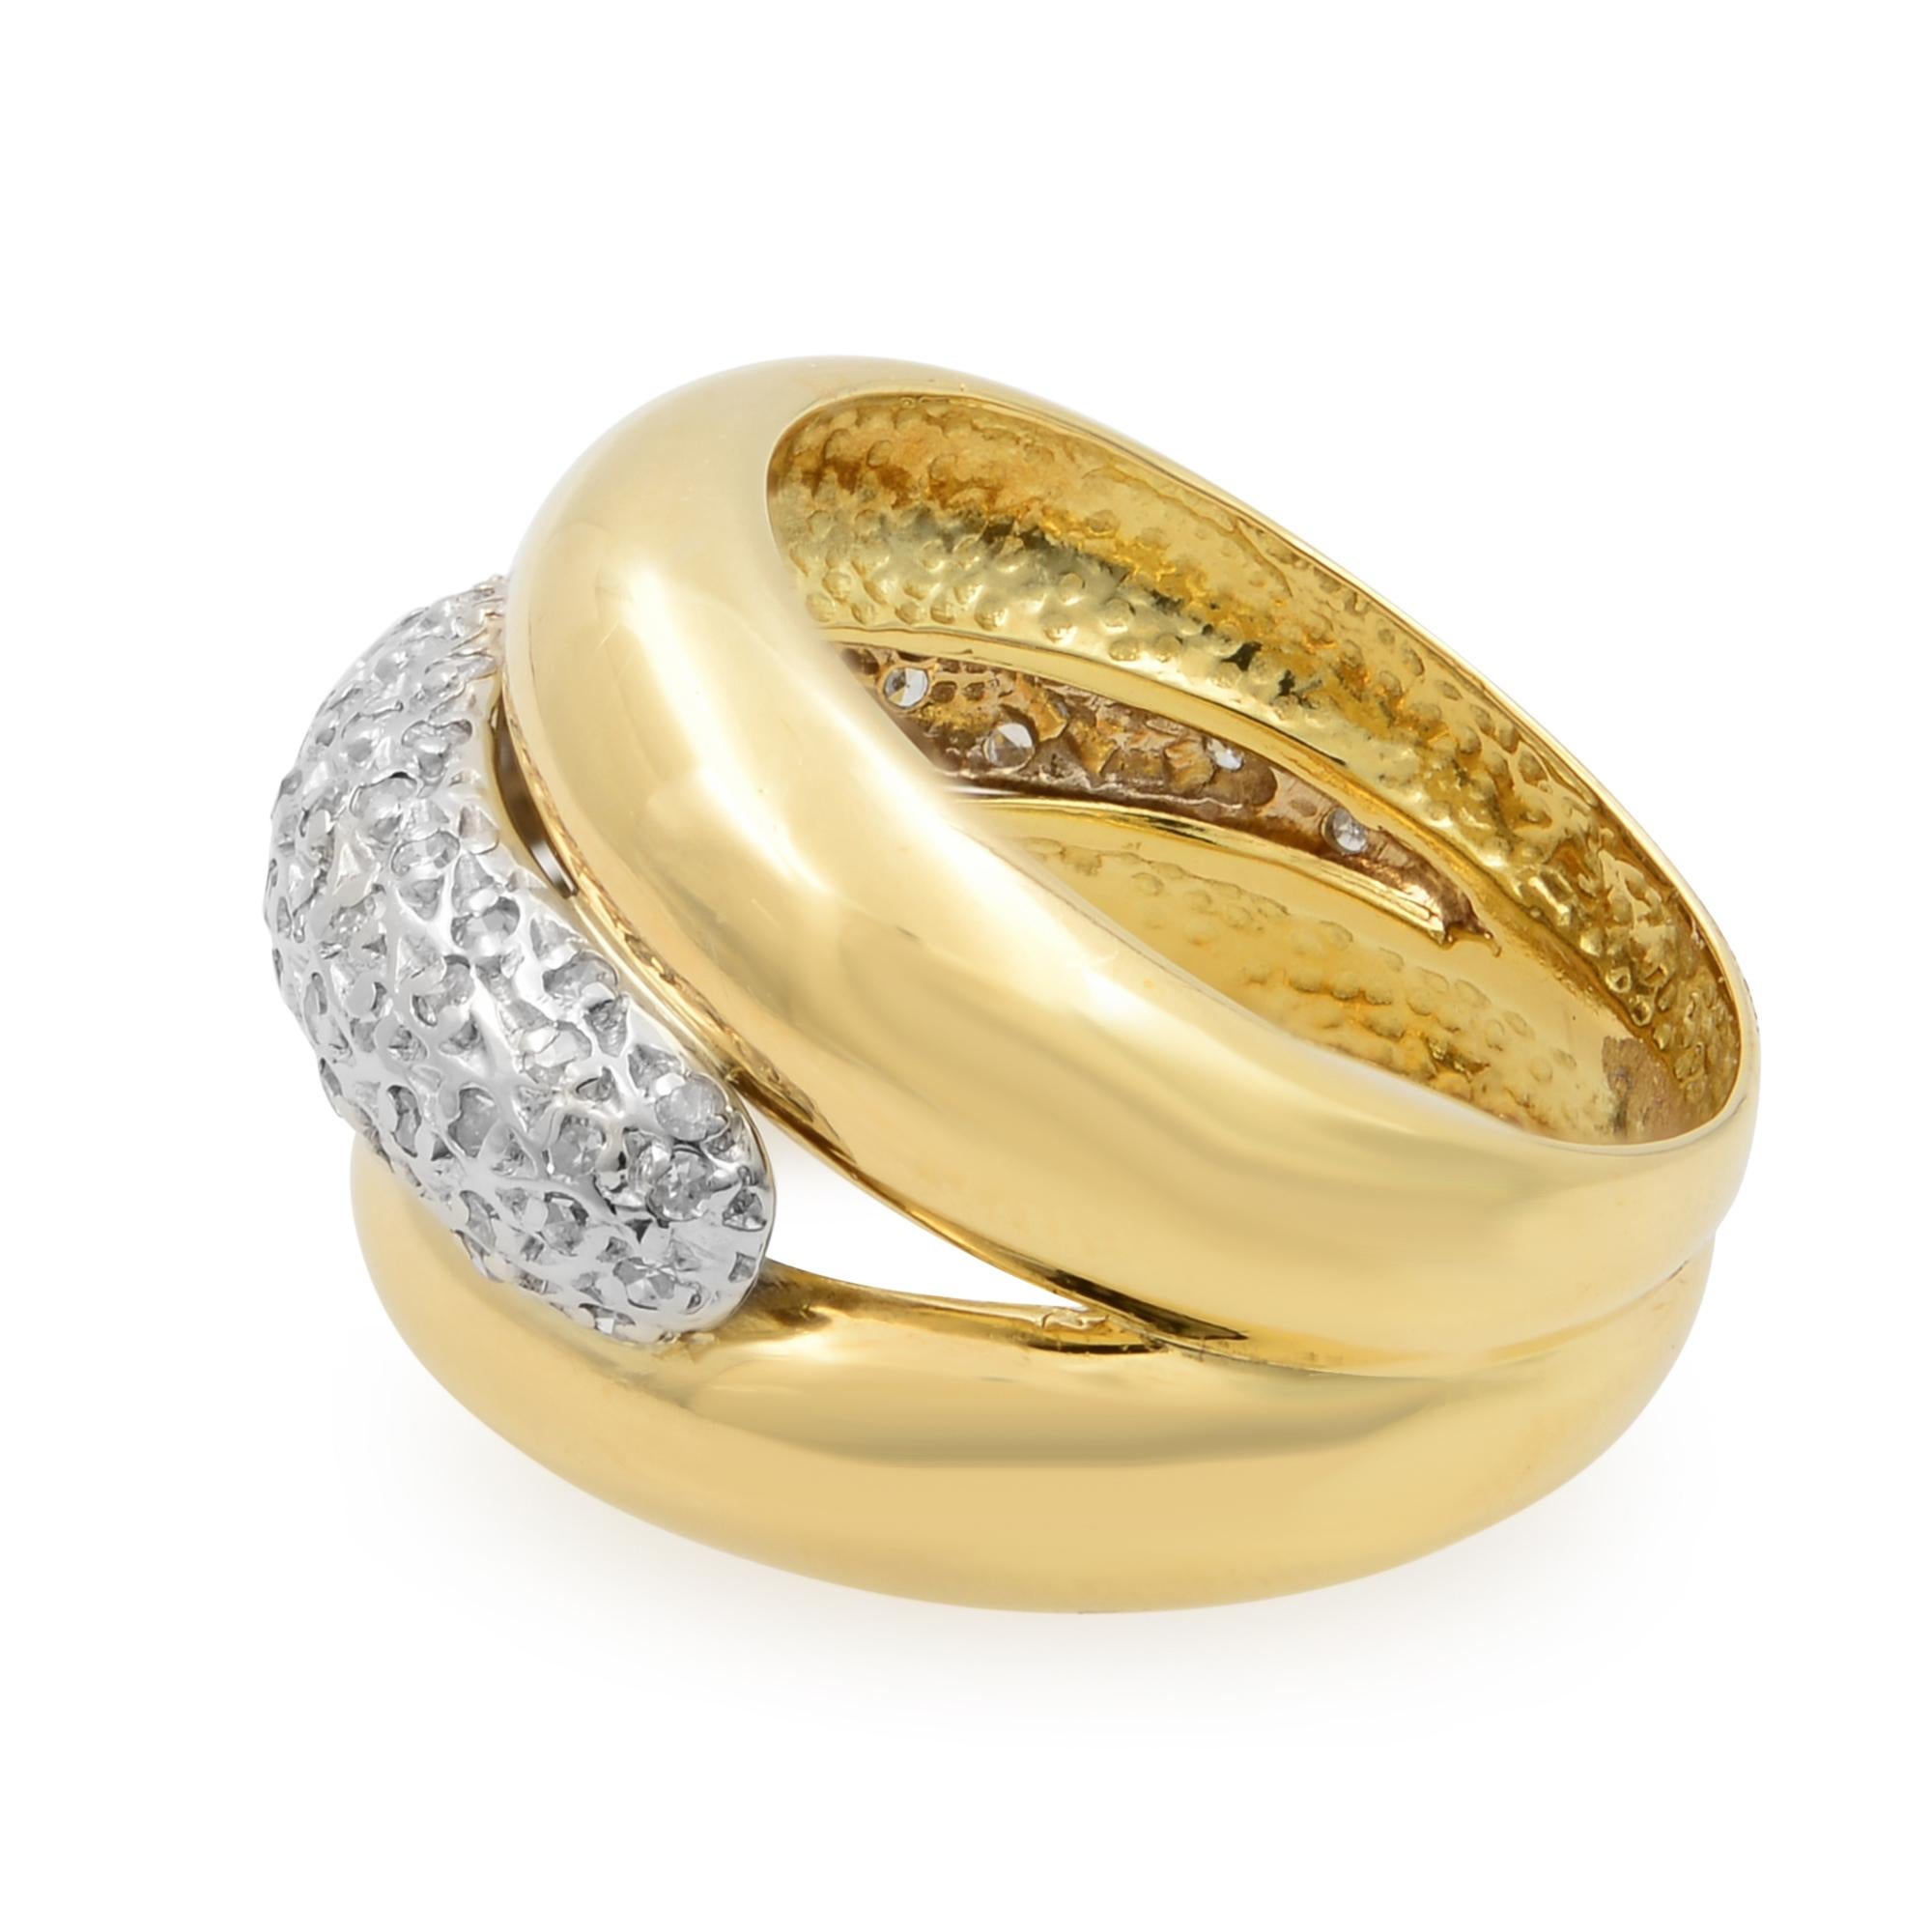 Chic and stylish, diamond ladies ring band adorned with pave set round brilliant cut diamonds weighing 0.50 carat. This ring makes a great gift for someone special. Crafted in highly polished 14k yellow gold. Ring size: 8.25. Total weight: 10.07